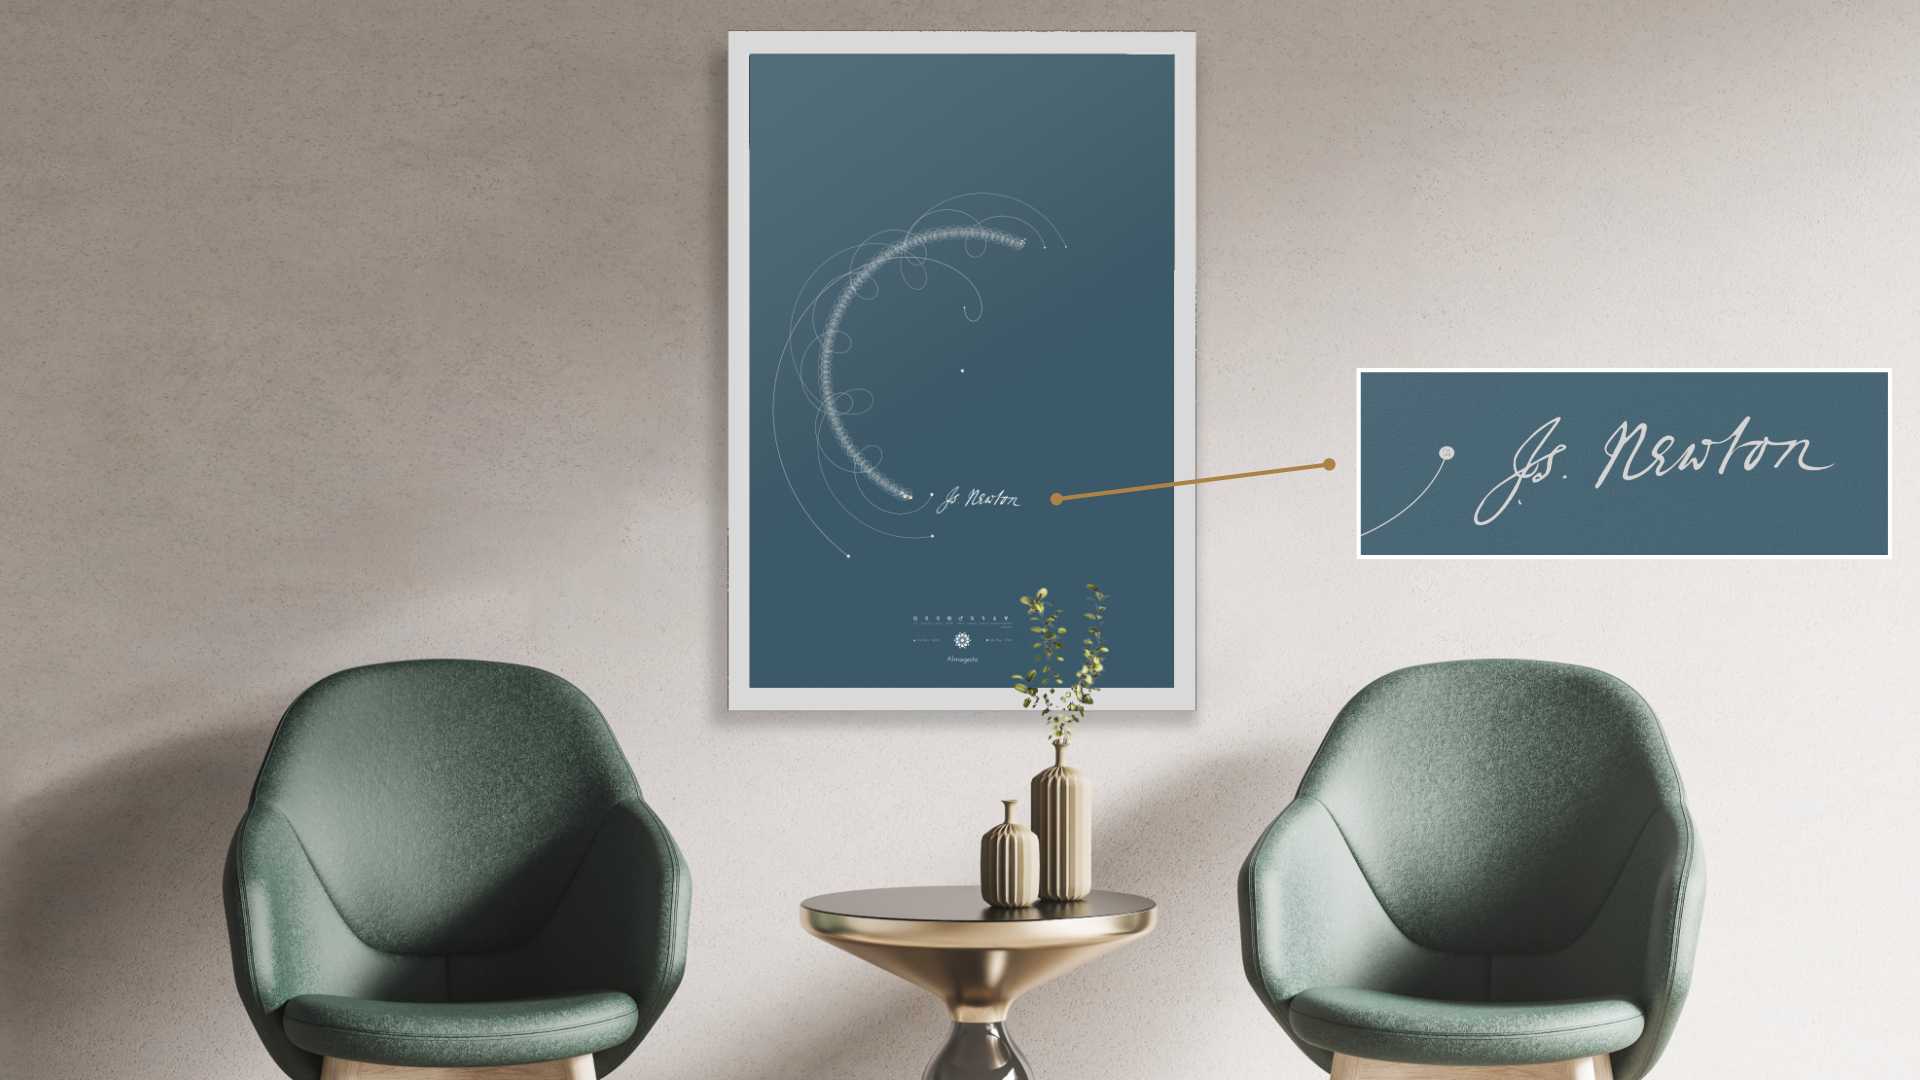 A special designed poster to celebrate Newton's intuition that allowed the discovery of Neptune.